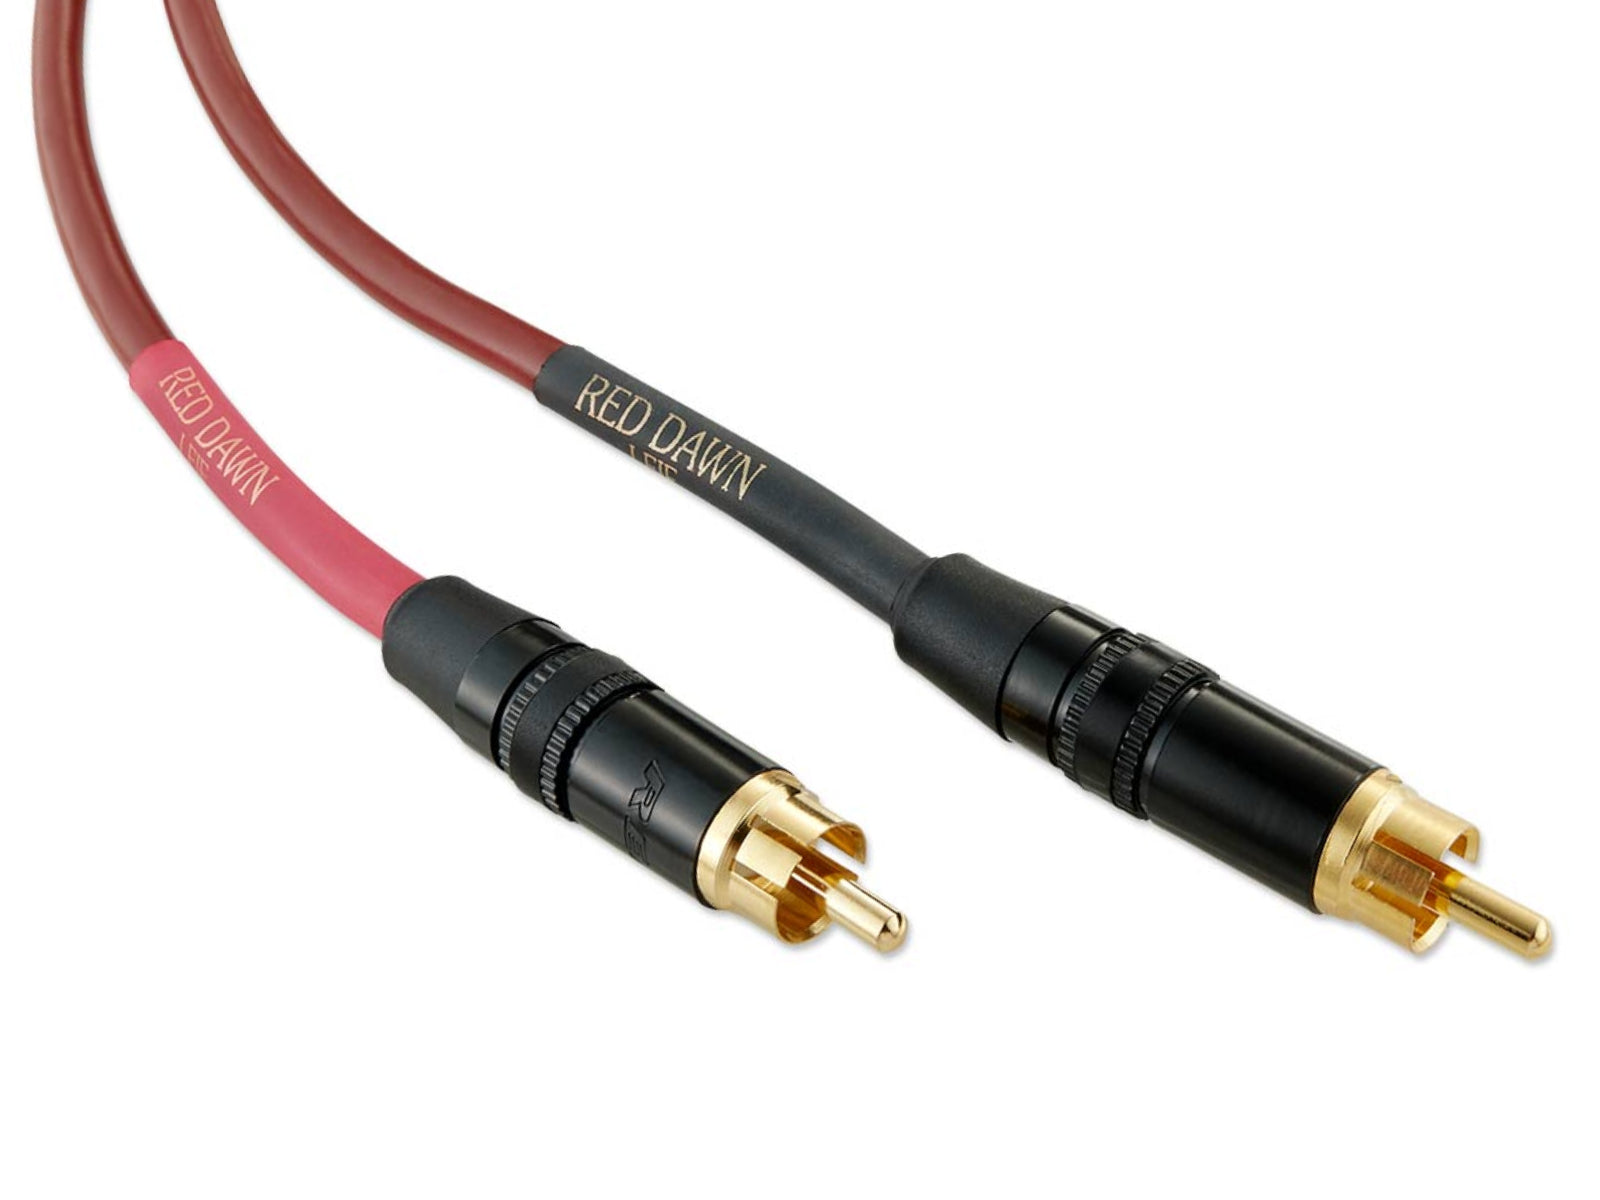 Nordost Red Dawn RCA Analogue